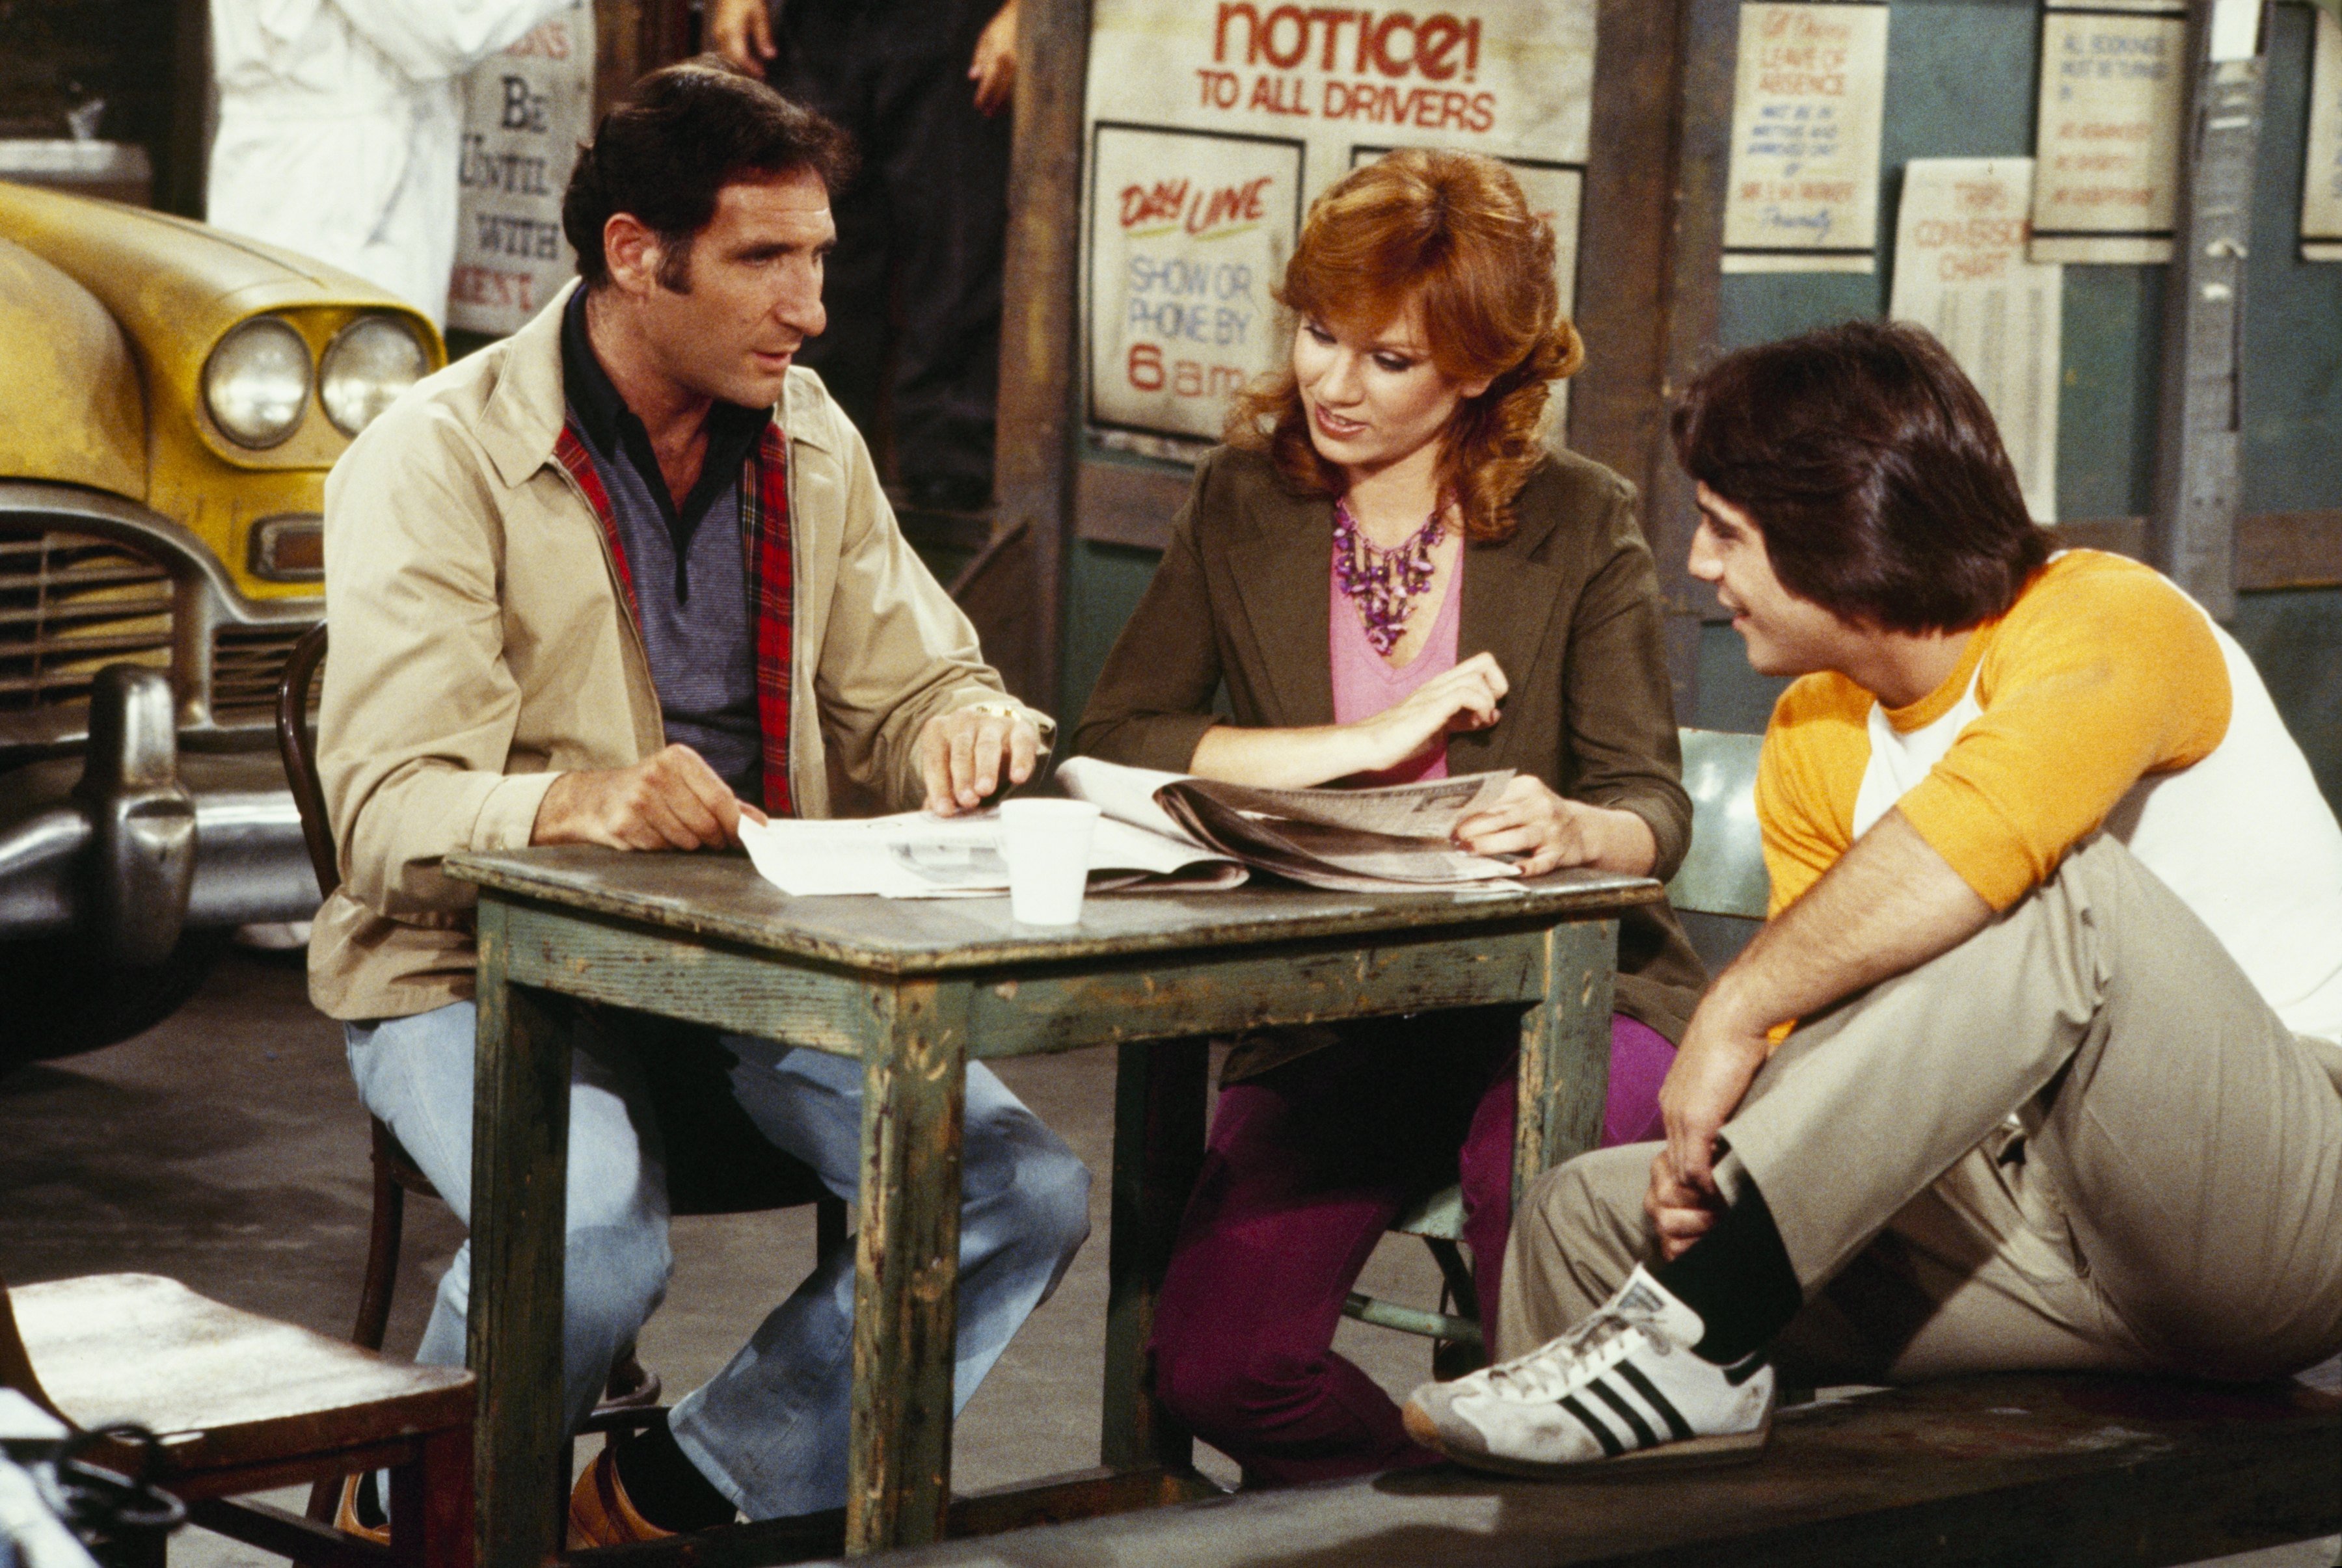 Judd Hirsch, Marilu Henner, and Tony Danza in a scene from 'Taxi,' 1979